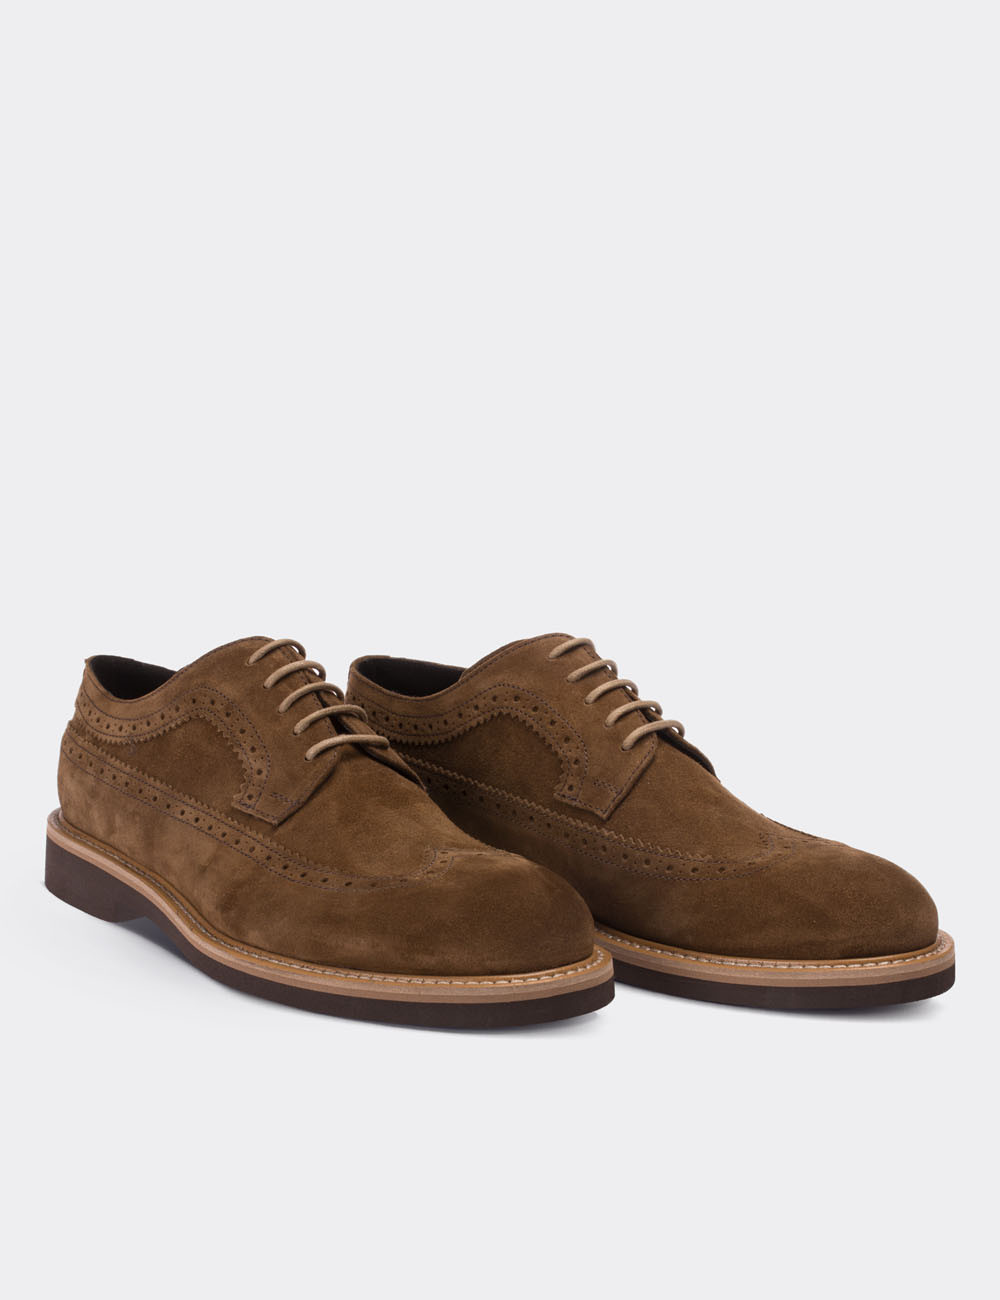 Brown Suede Leather Lace-up Shoes - 01293MKHVE19